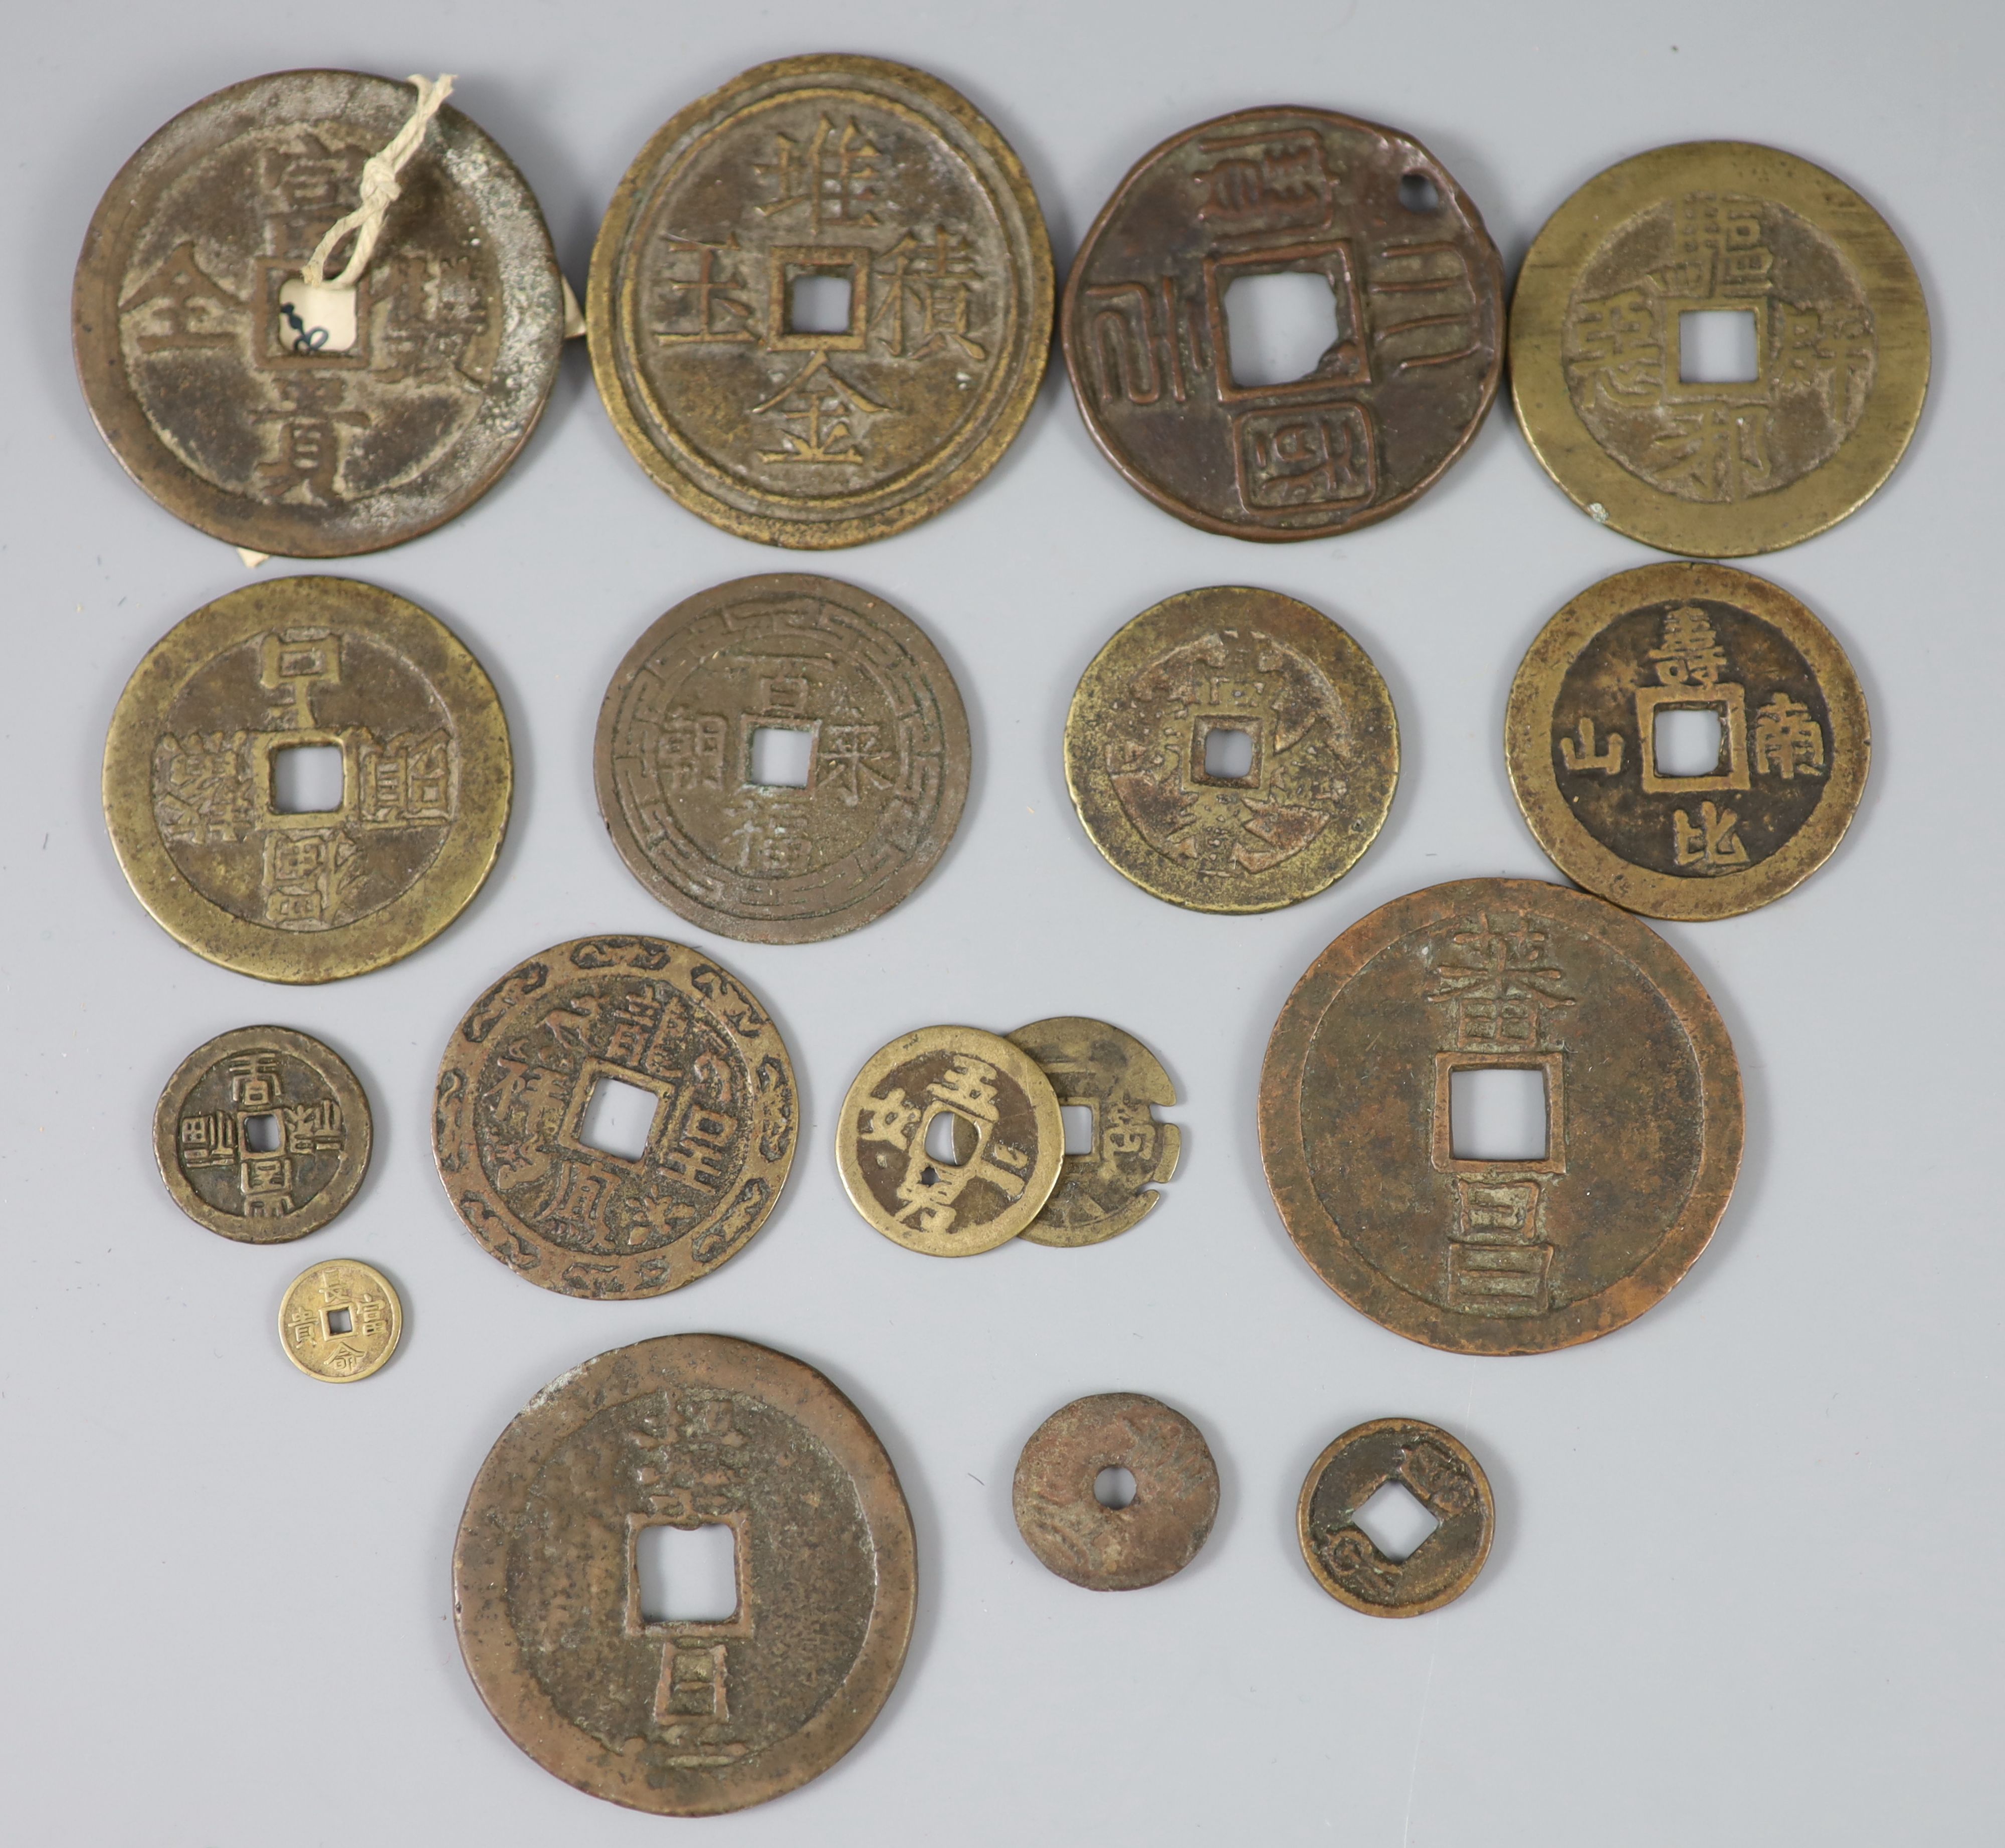 China, 17 bronze or copper charms or amulets, Qing dynasty,